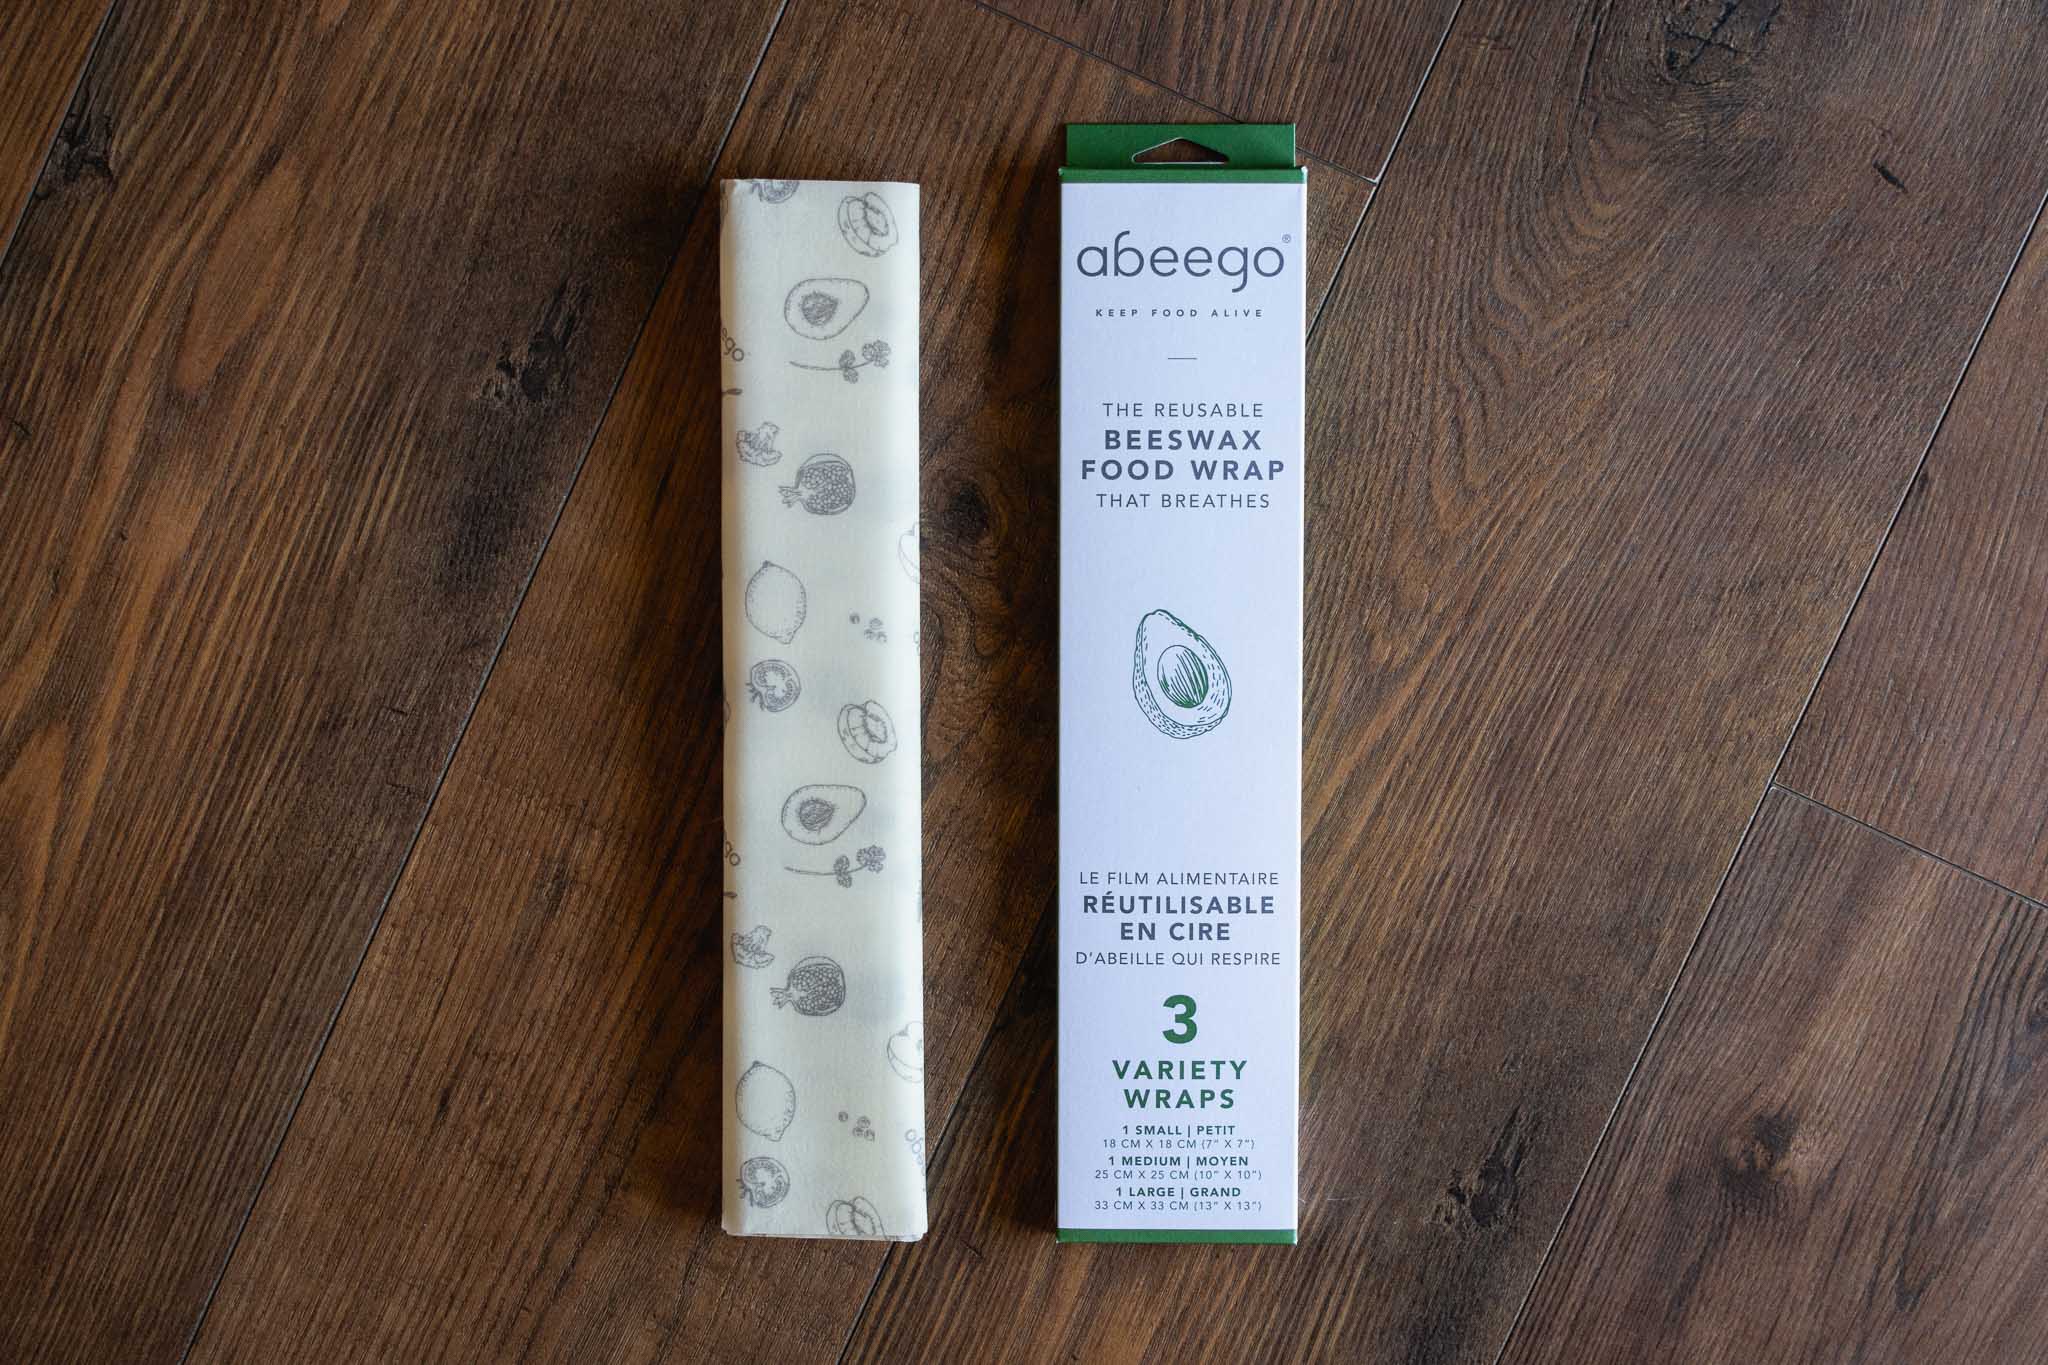 Beeswax Food Wraps by Abeego